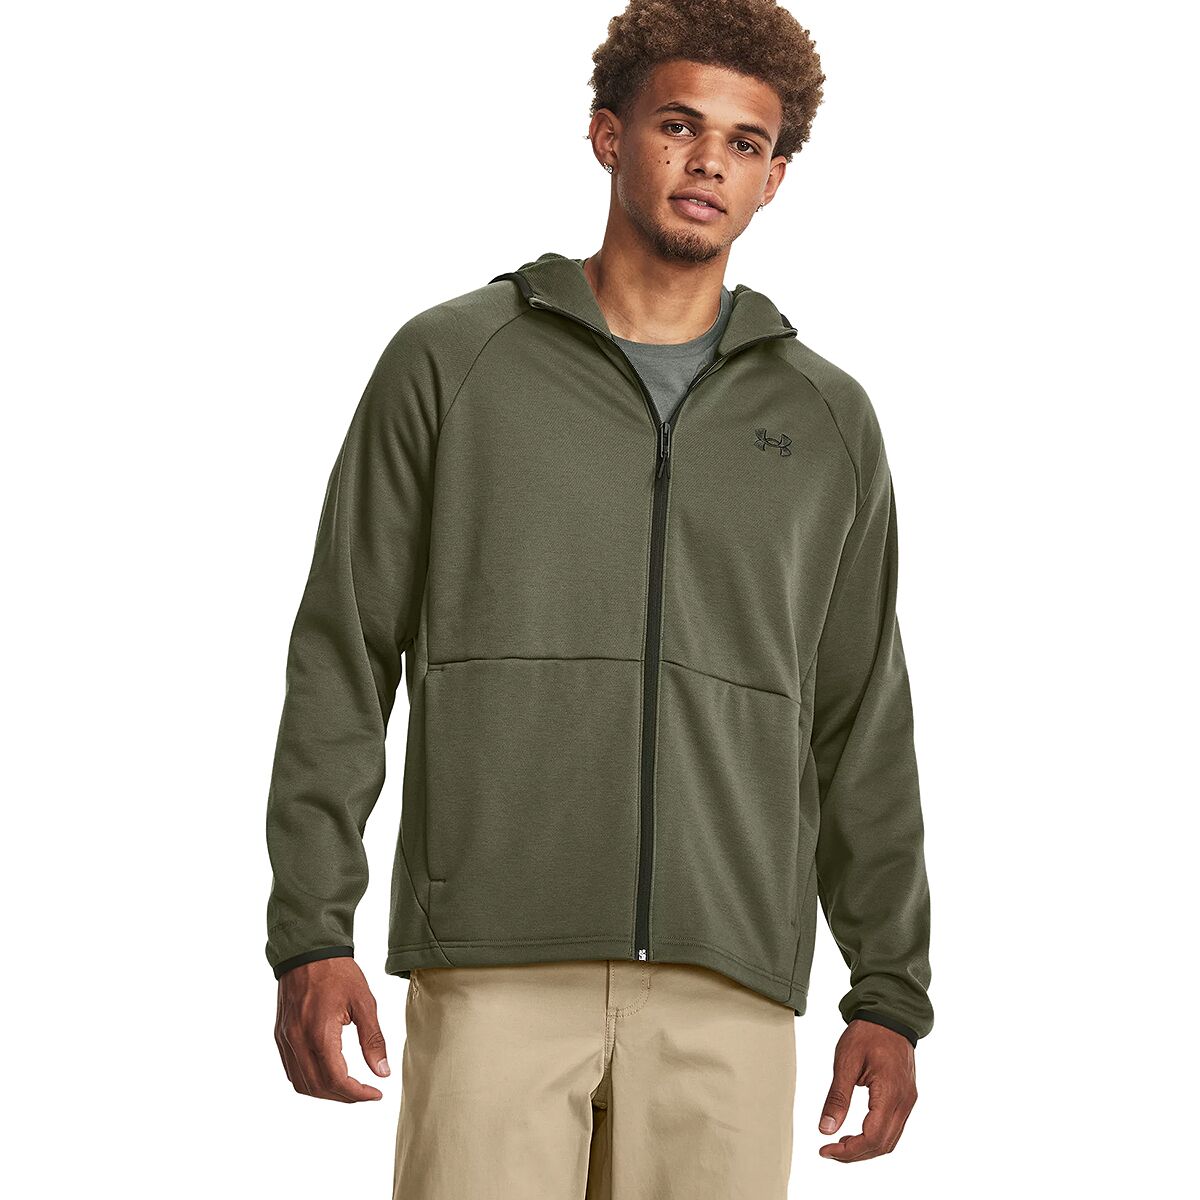 Under Armour Storm Twill Specialist Full-Zip Hoodie - Men's - Clothing